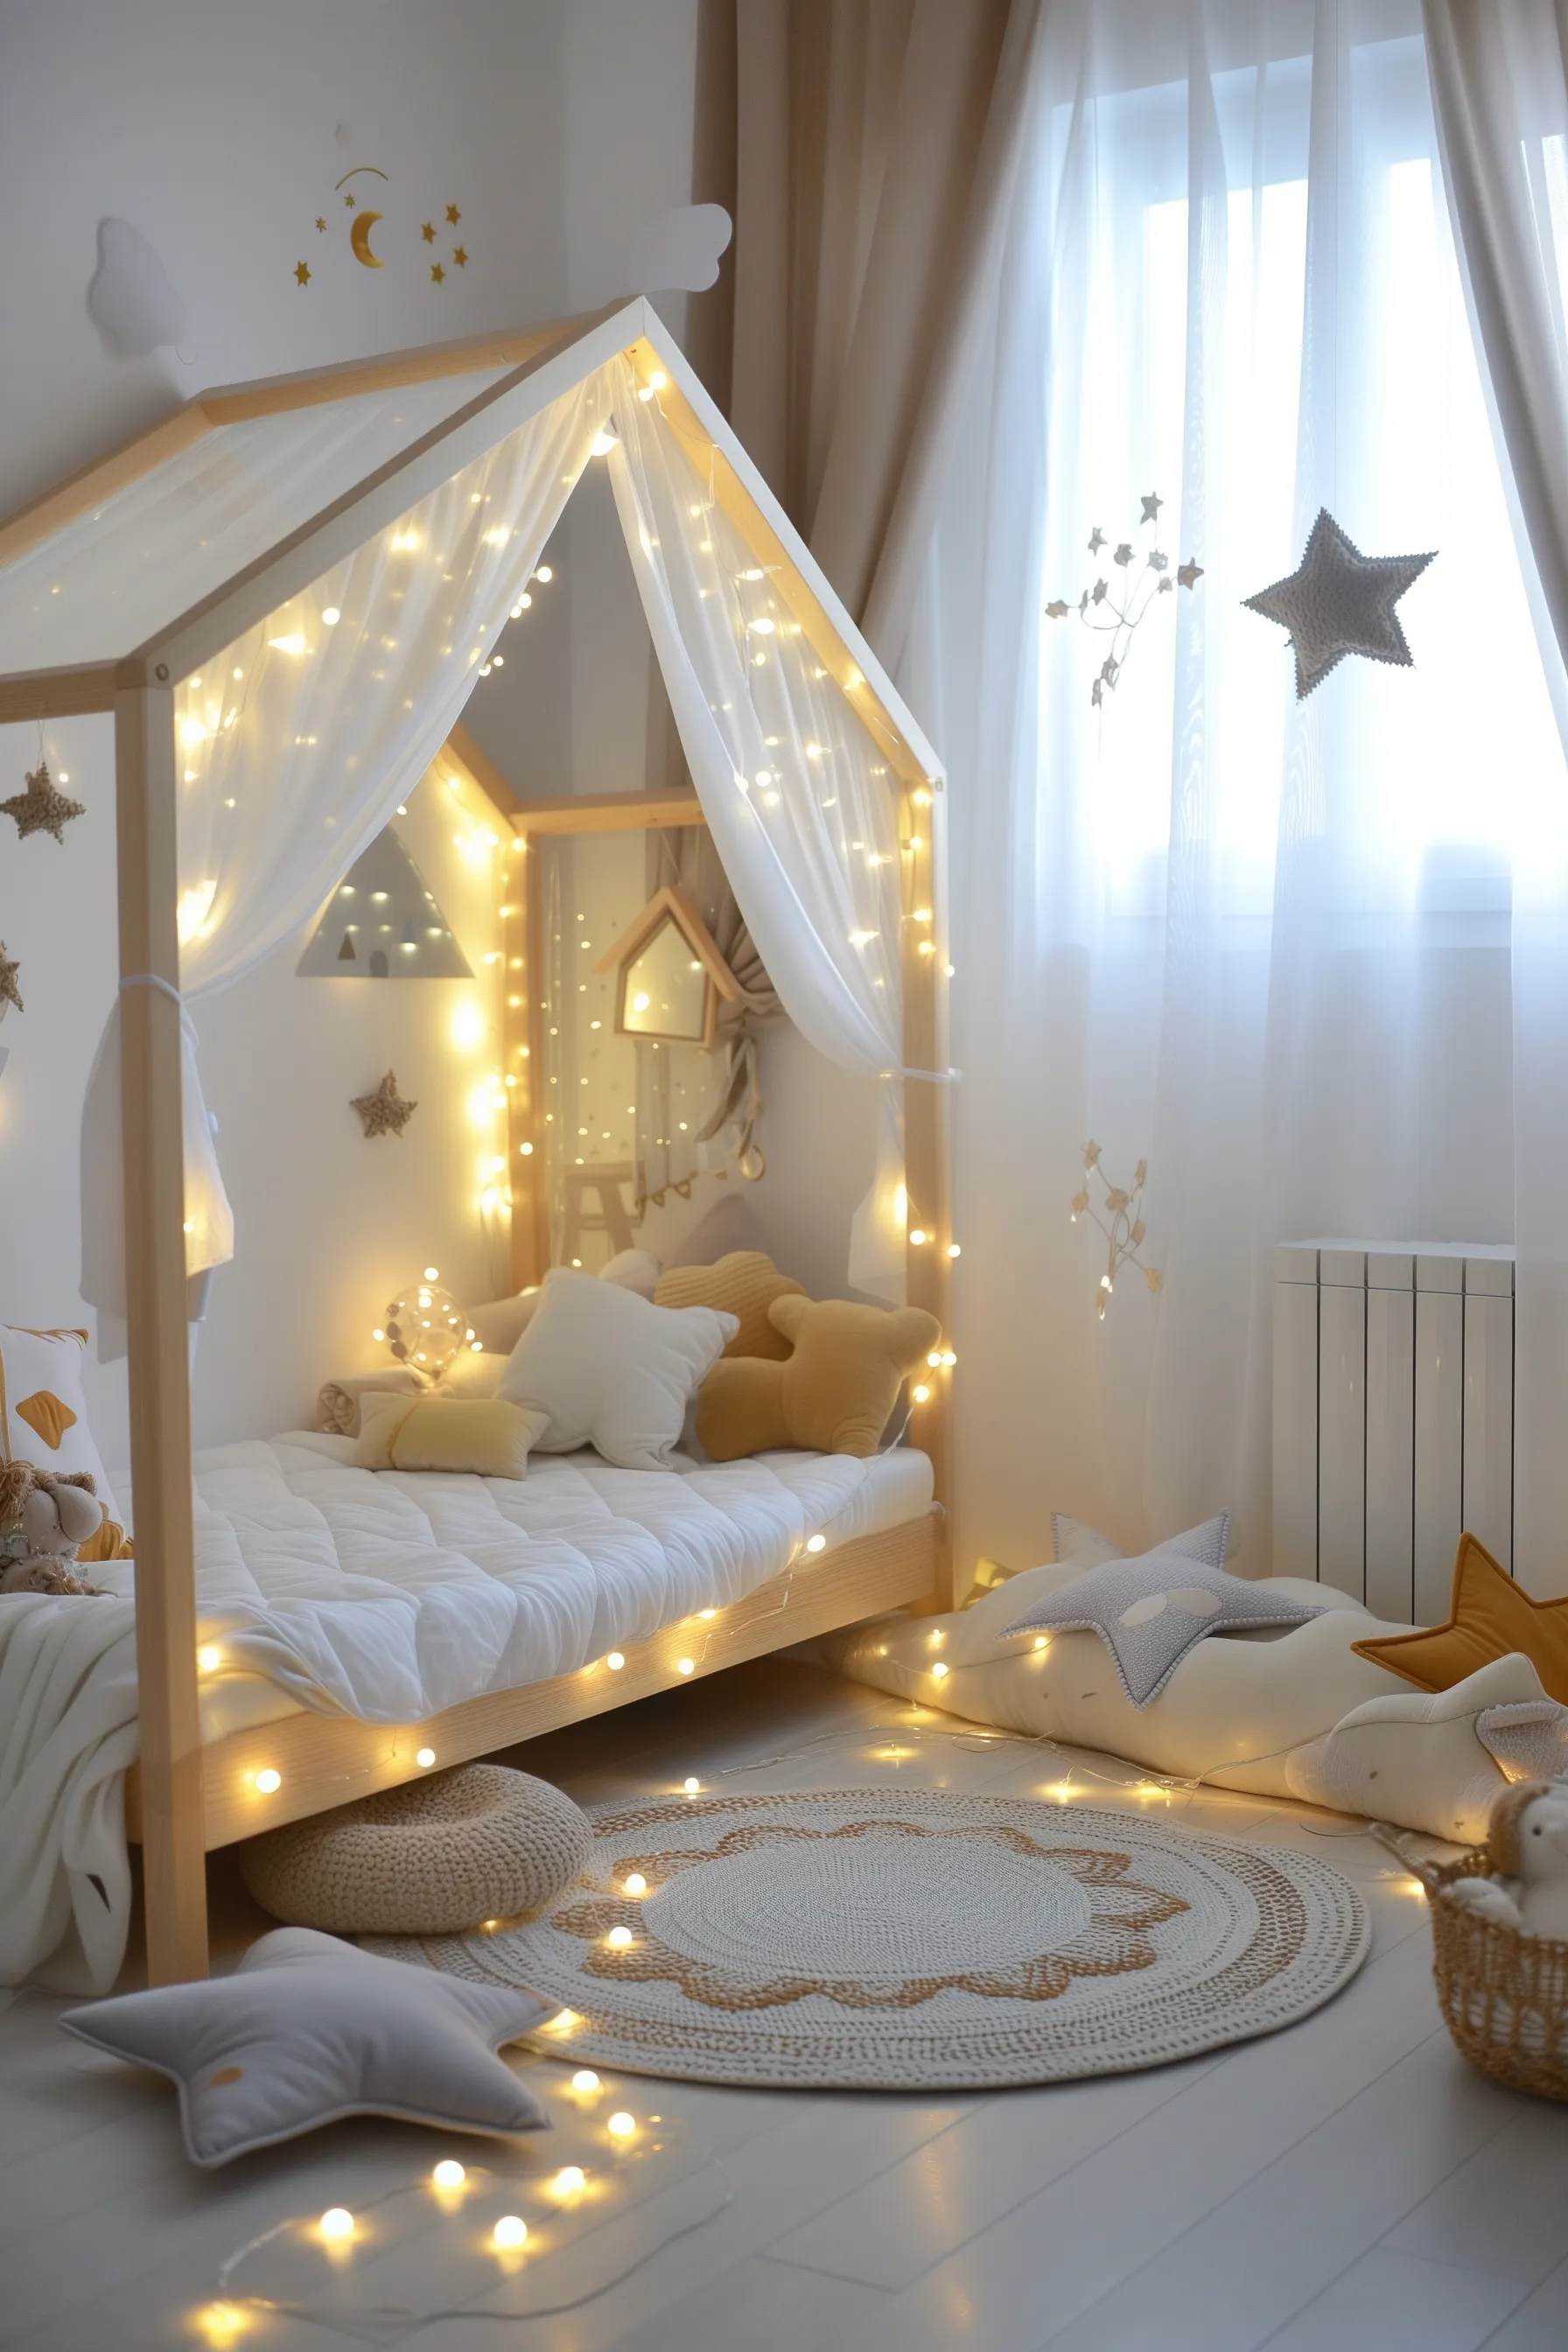 Fairy lights in a white space themed bedroom